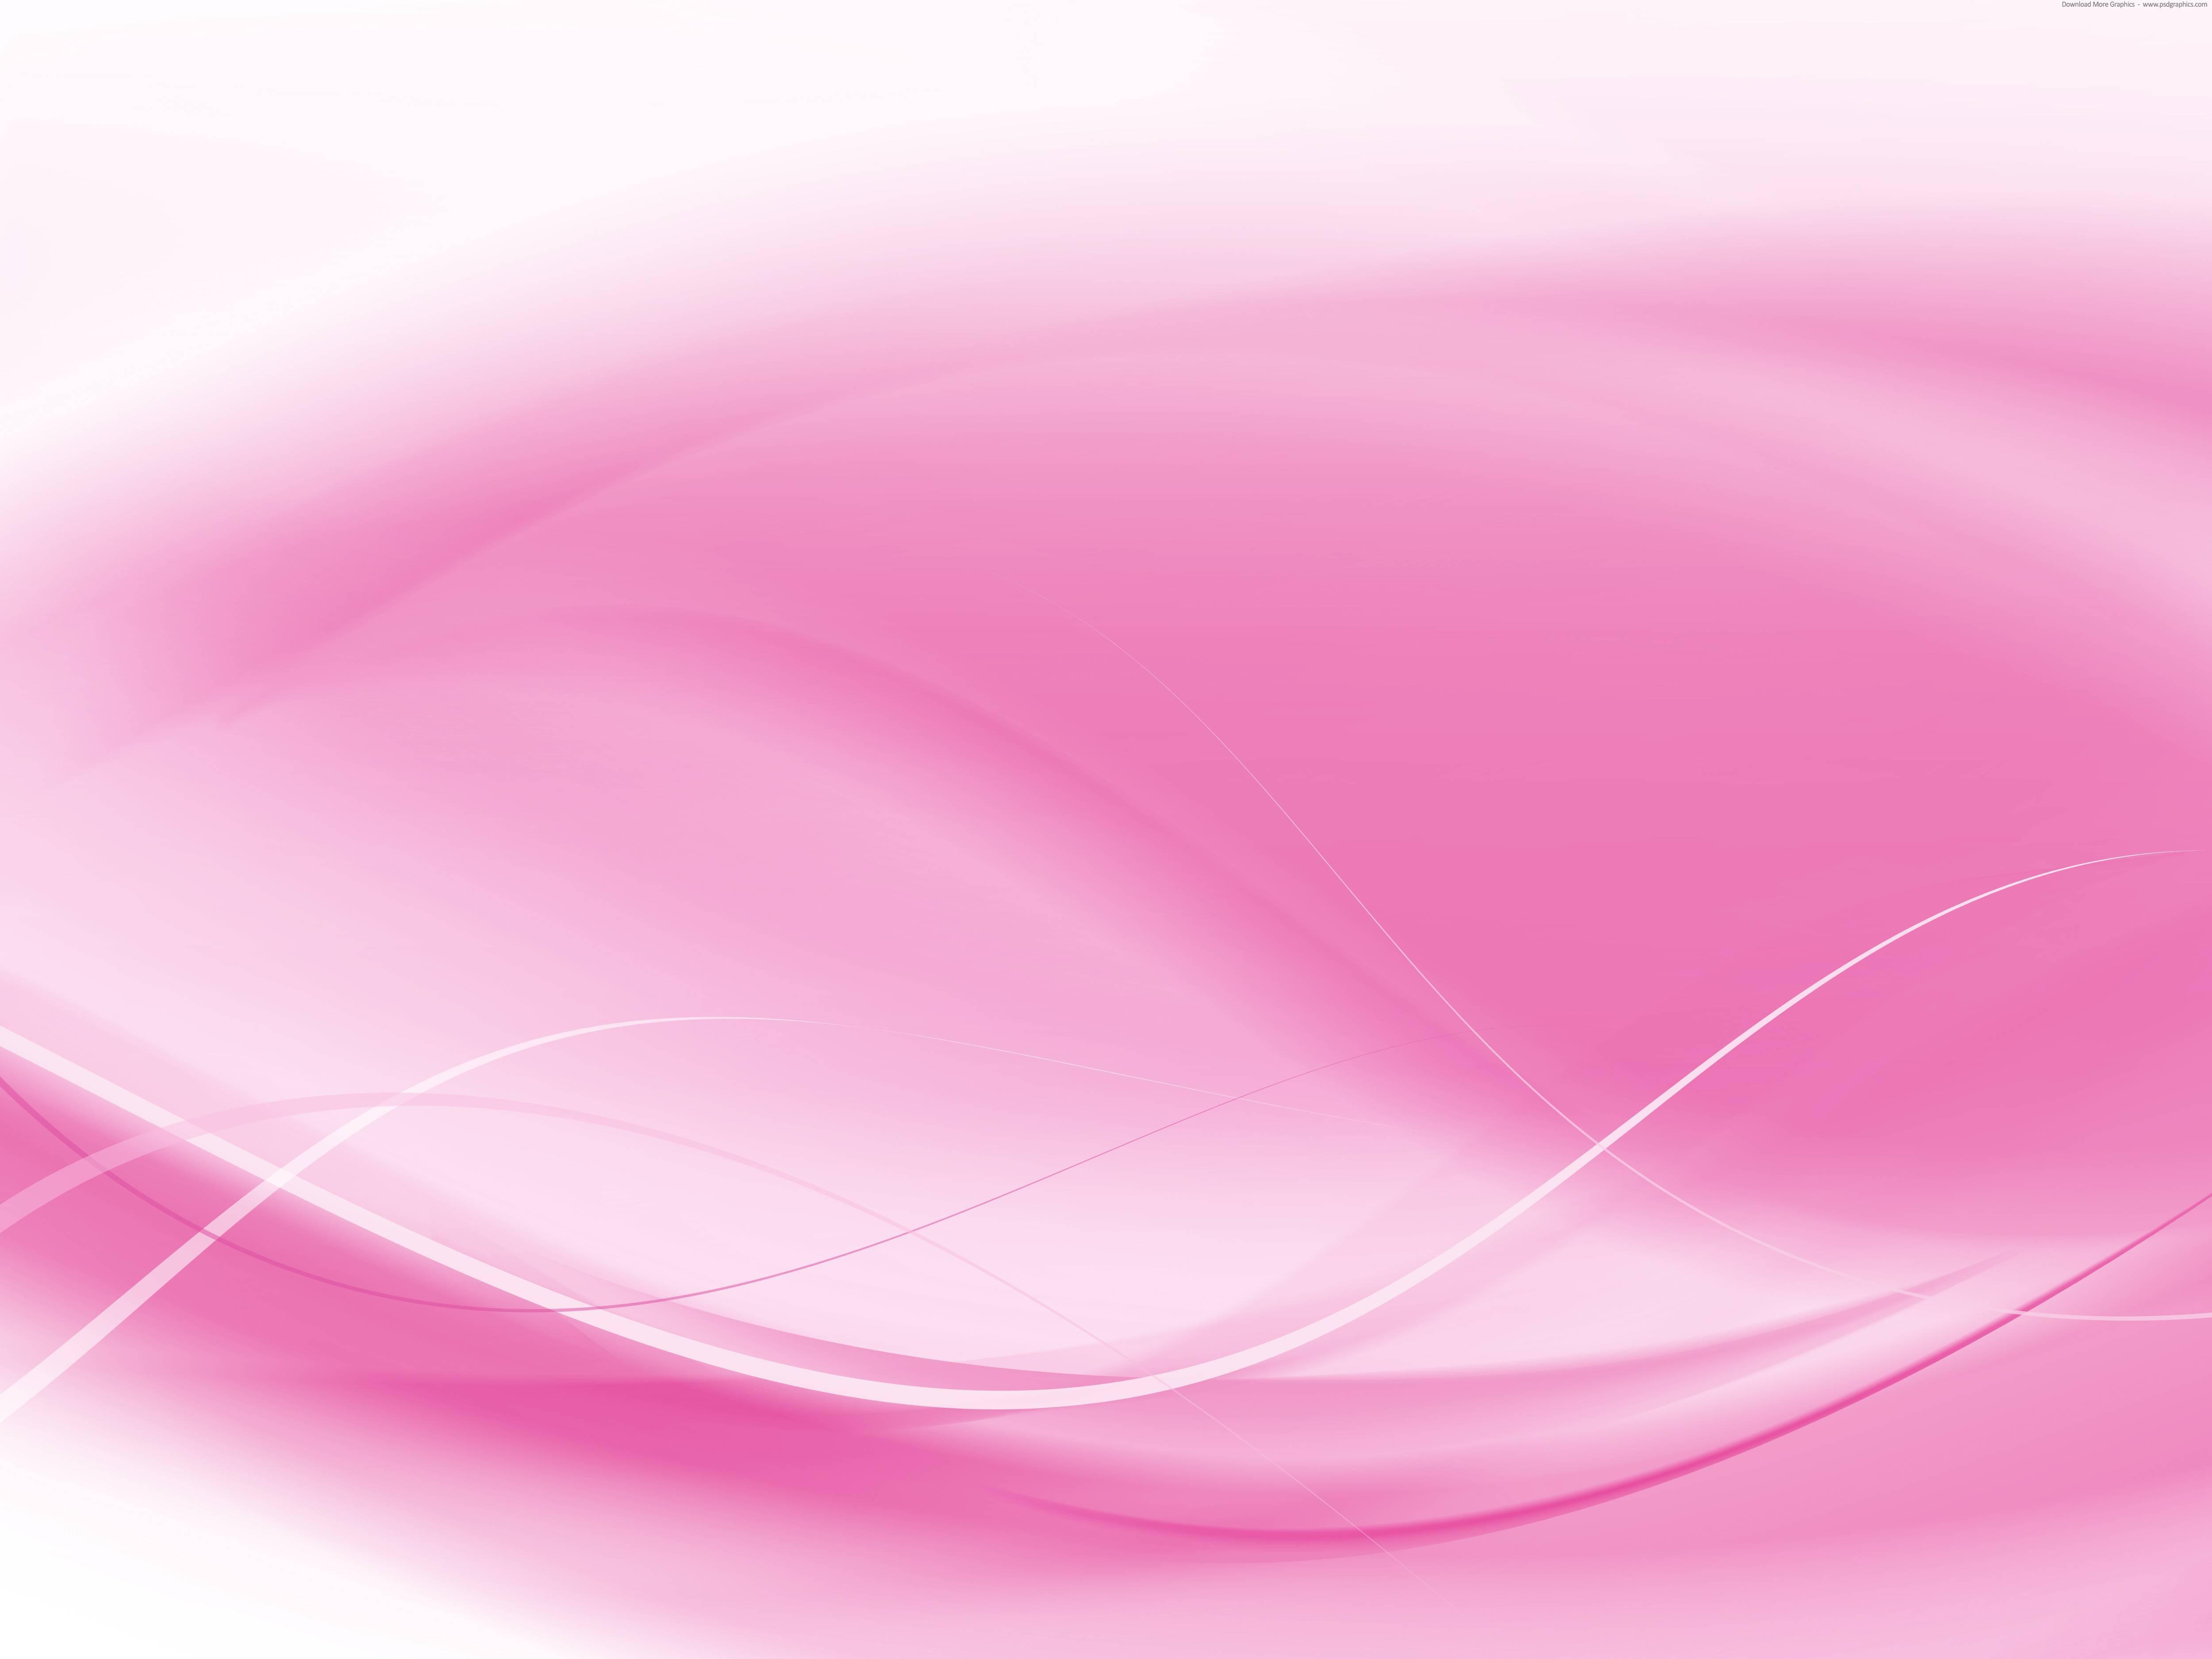 5000 x 3750 · jpeg - Pink Backgrounds Wallpapers - Wallpaper Cave